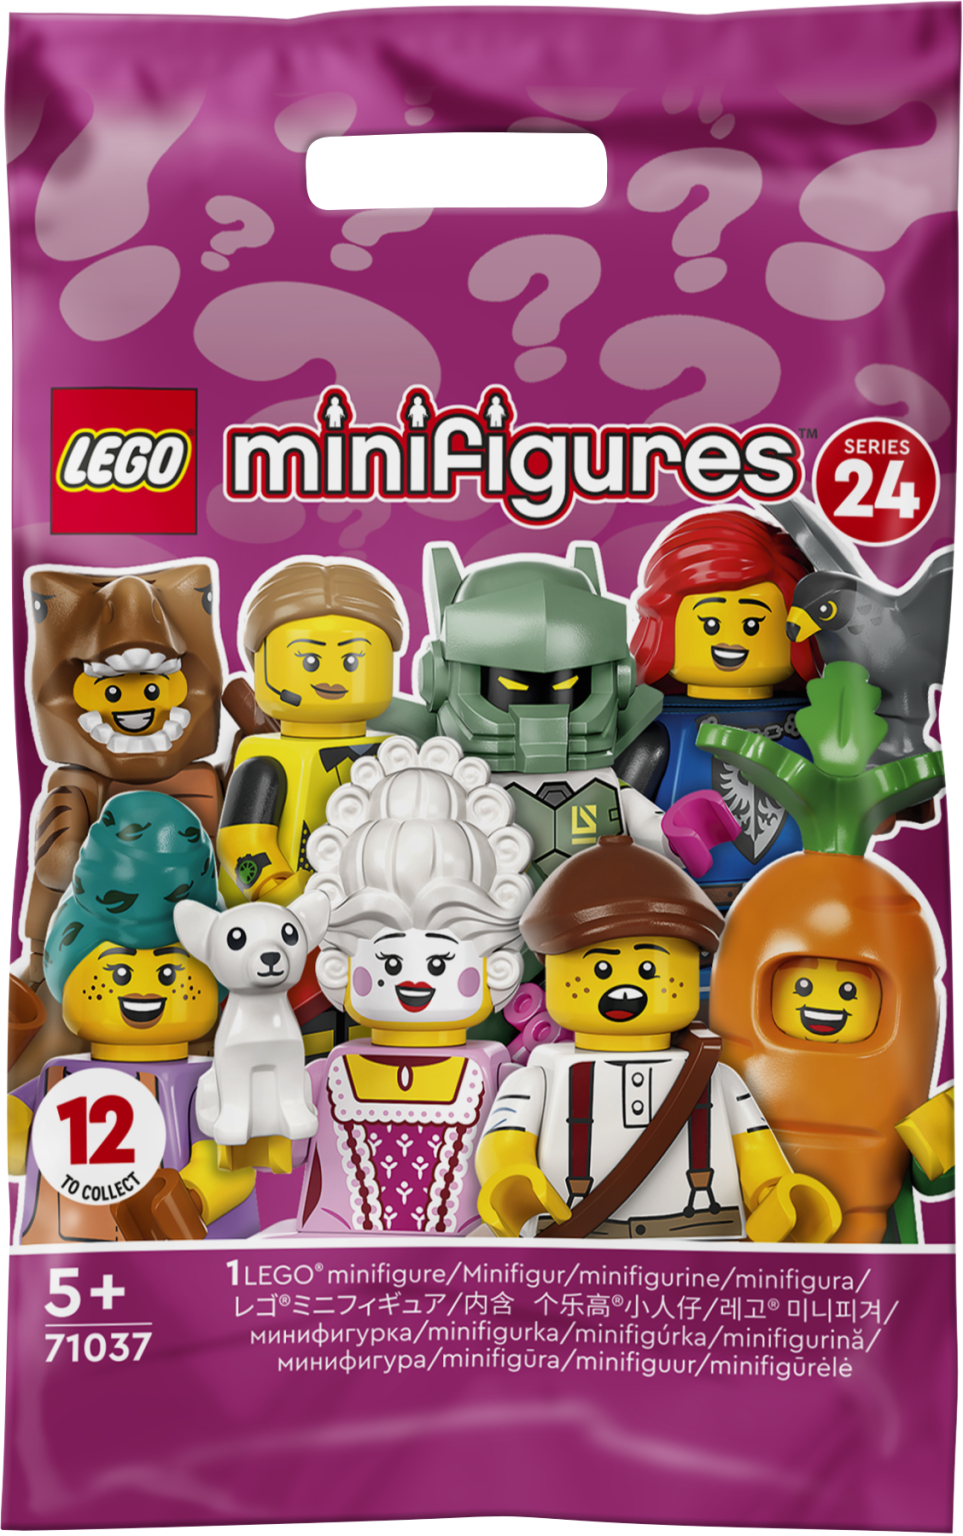 Lego Collectible Minifigures 71037 Series 24 Revealed